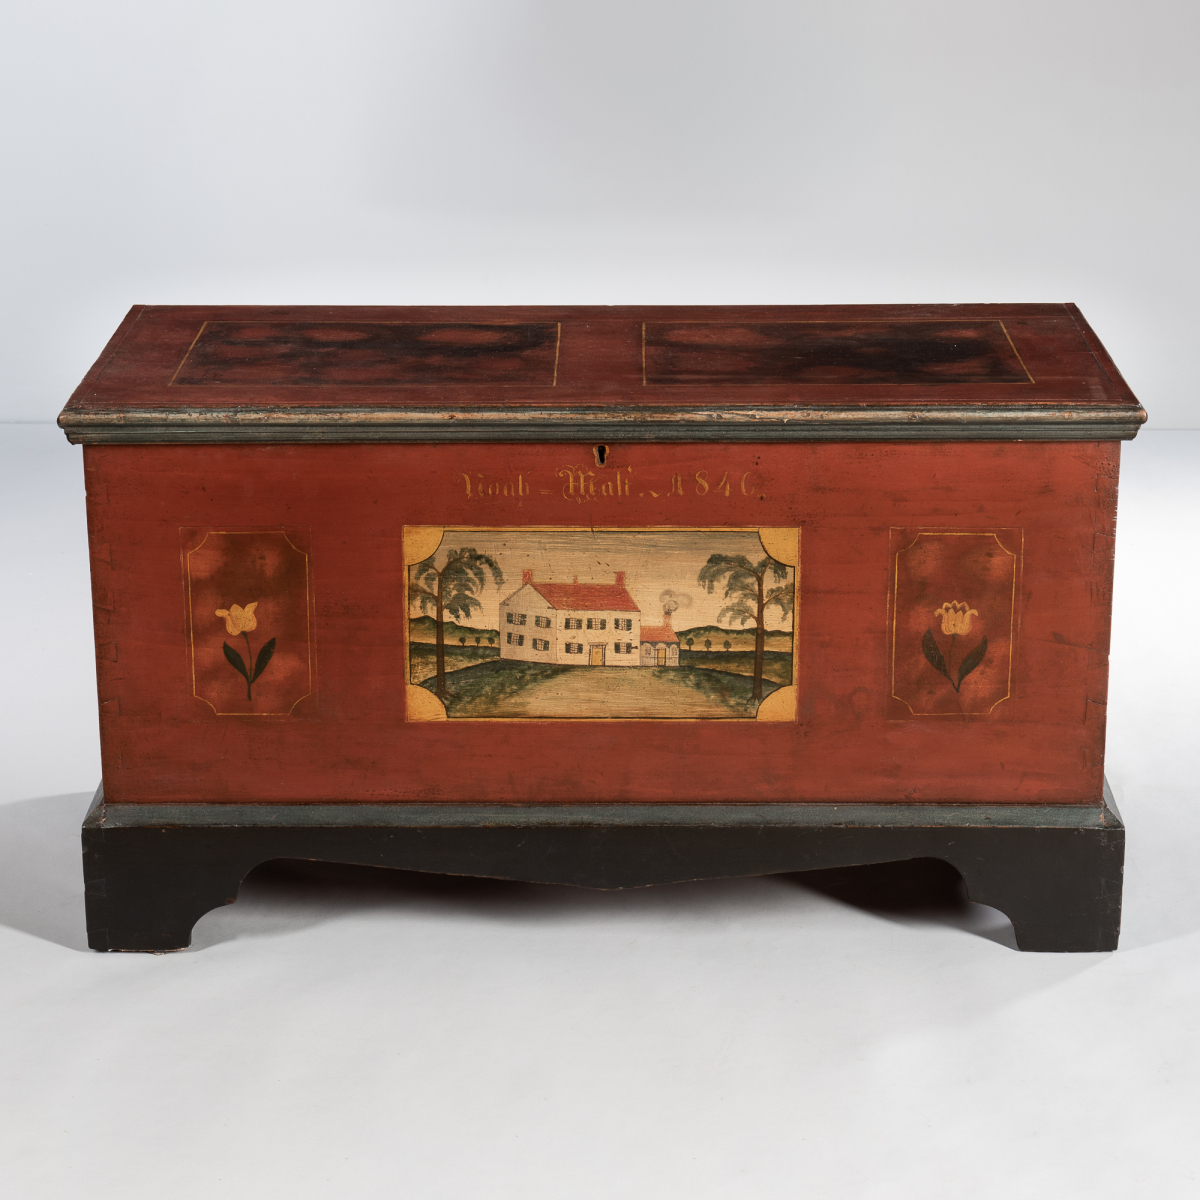 Paint-decorated Dower Chest "Noah Mali," Sugar Creek Township, Tuscarawas County, Ohio, 1846